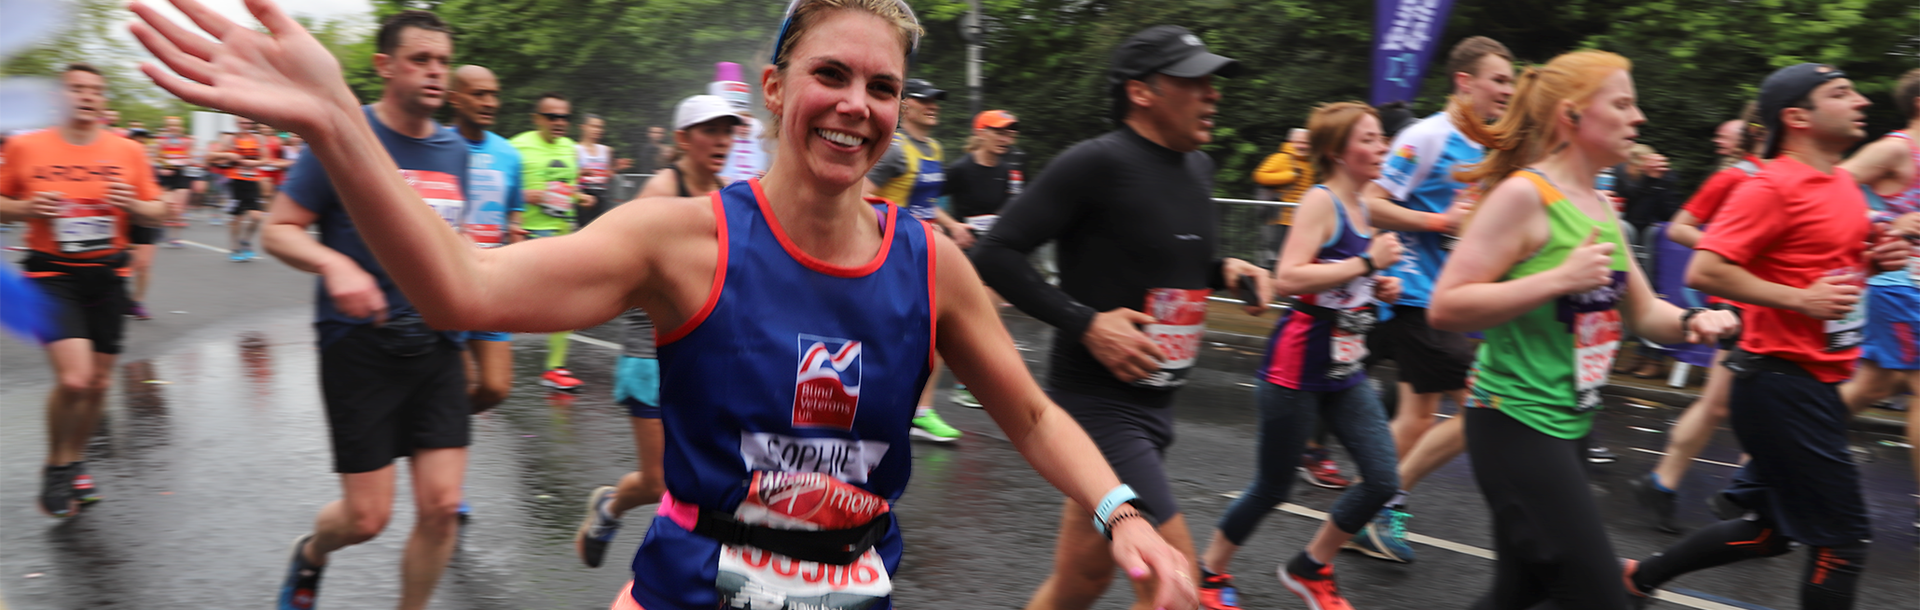 Charity supporter, Sophie Delaney, wearing a Blind Veterans UK vest, running alongside a crowd of marathon runners, smiling and waving as she passes the camera.